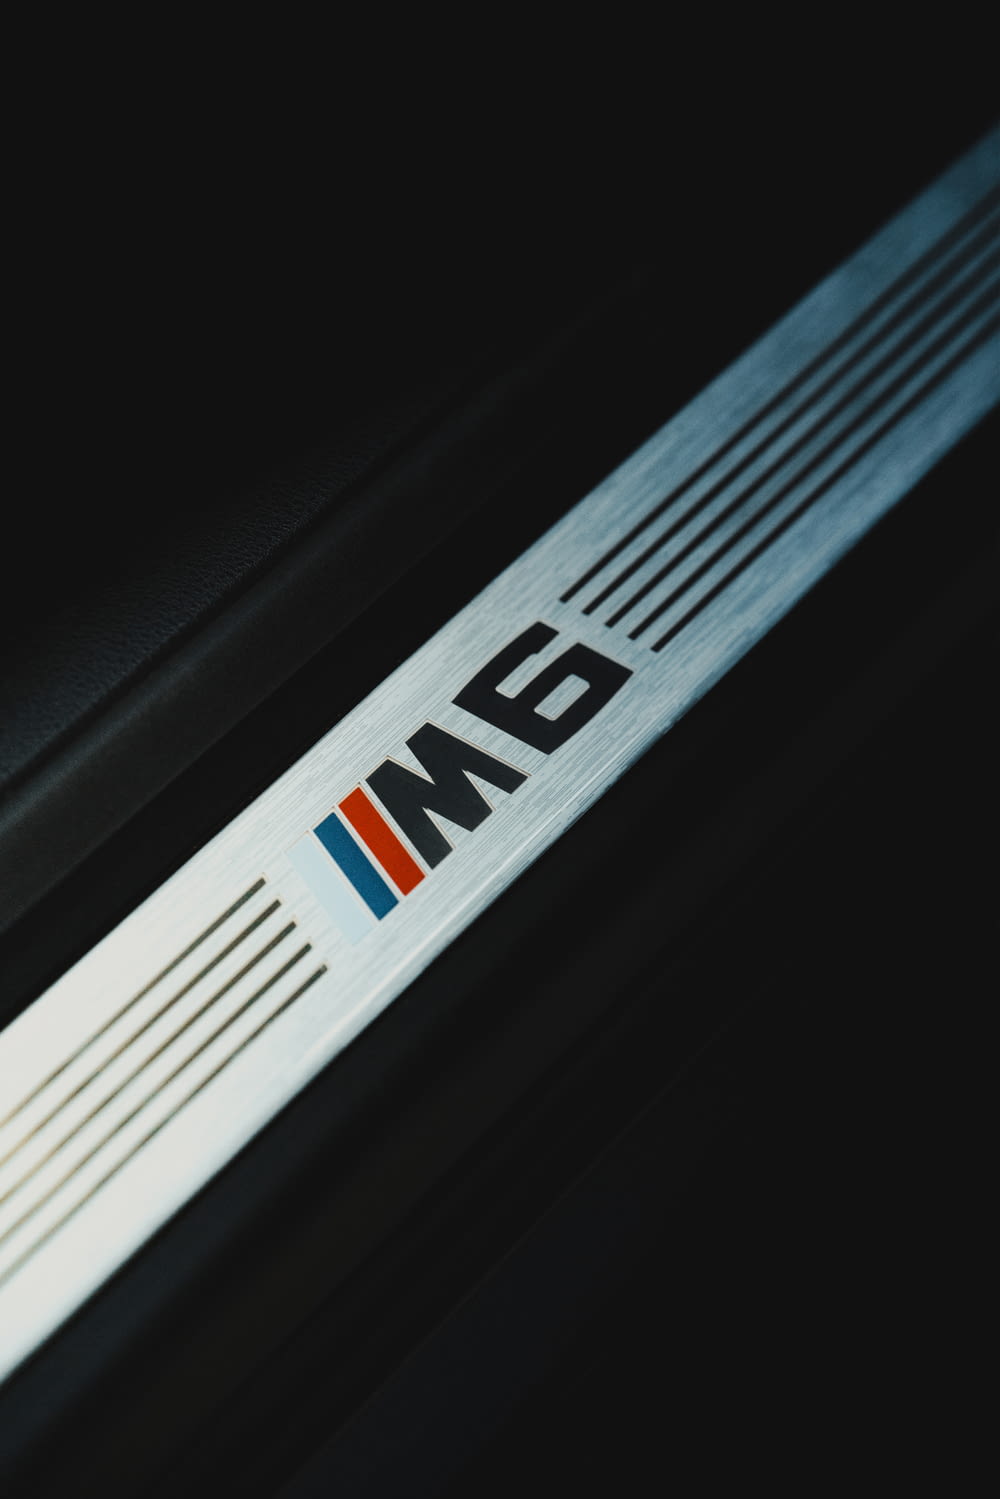 a bmw emblem is shown on the side of a car